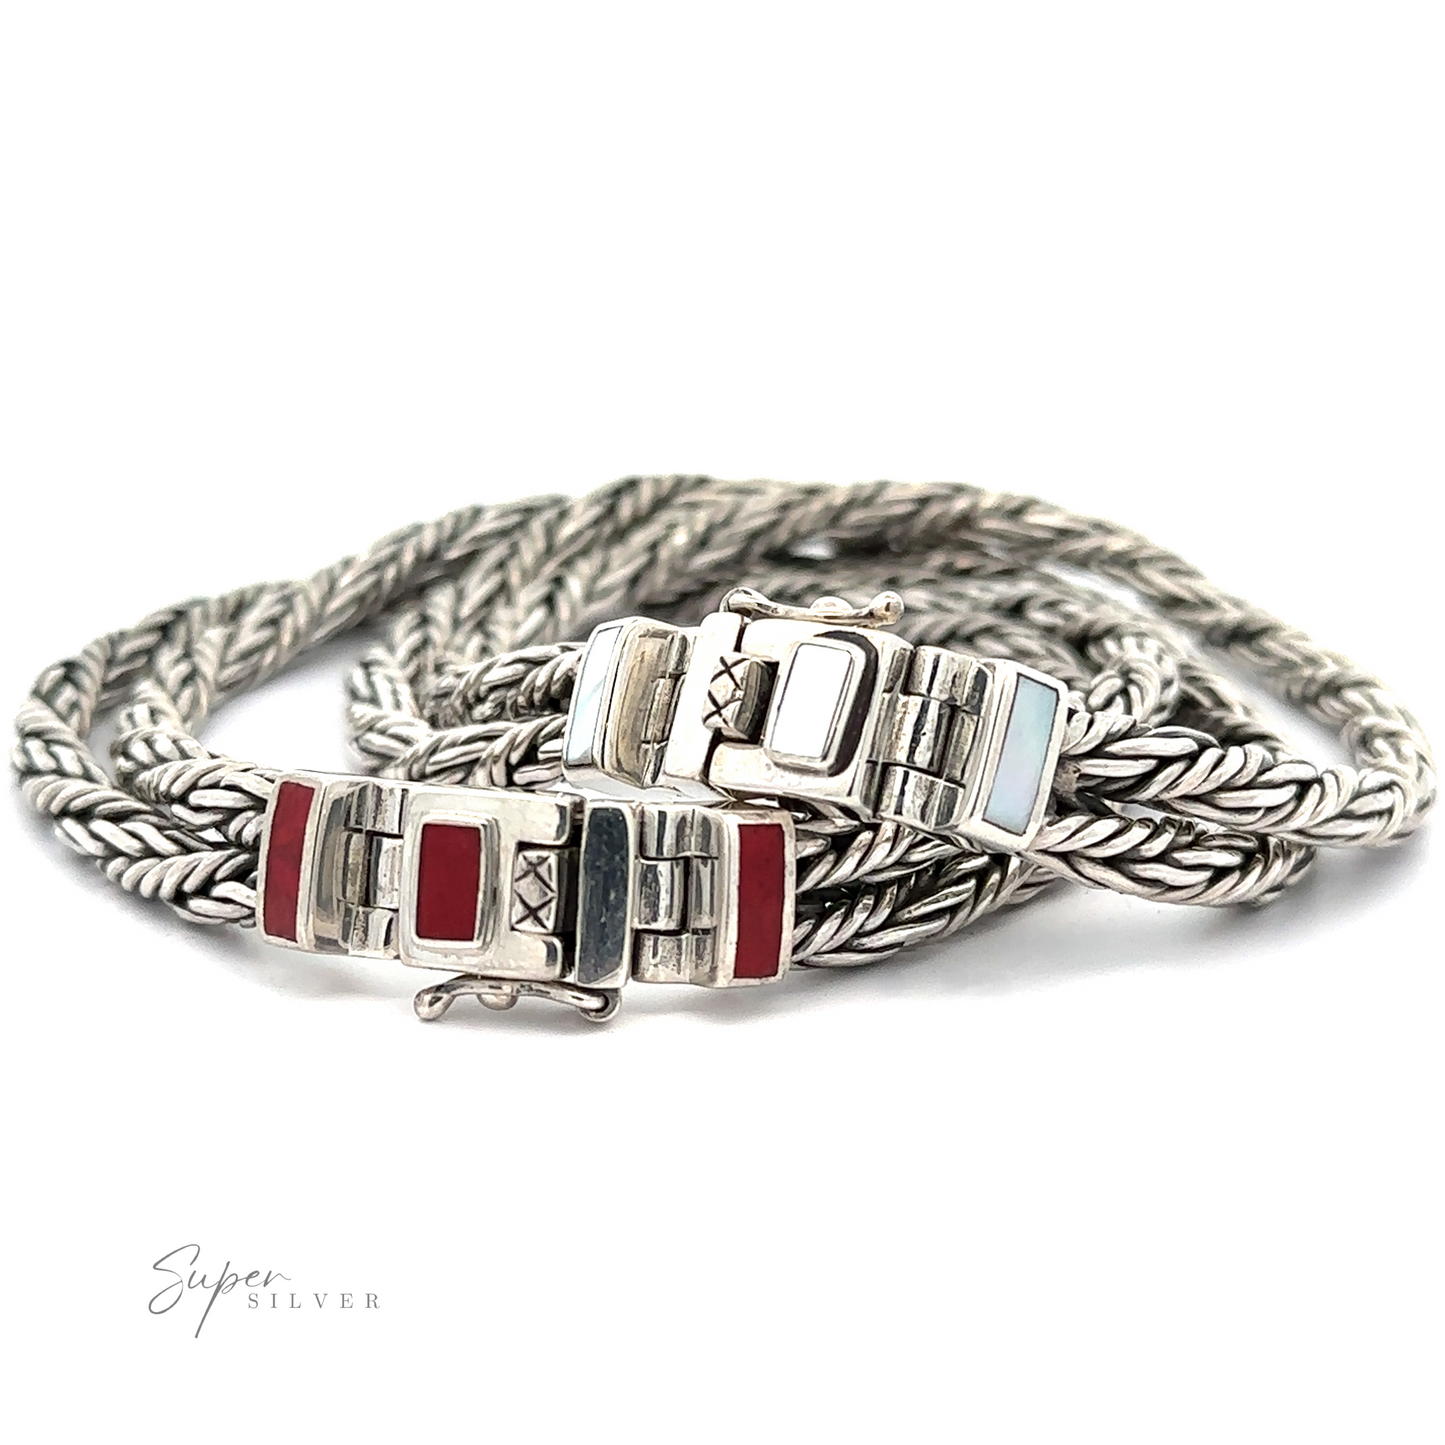 A Double Twisted Braided Rope Bracelet with an intricate double braided design and a clasp decorated with red coral and light blue enamel accents.